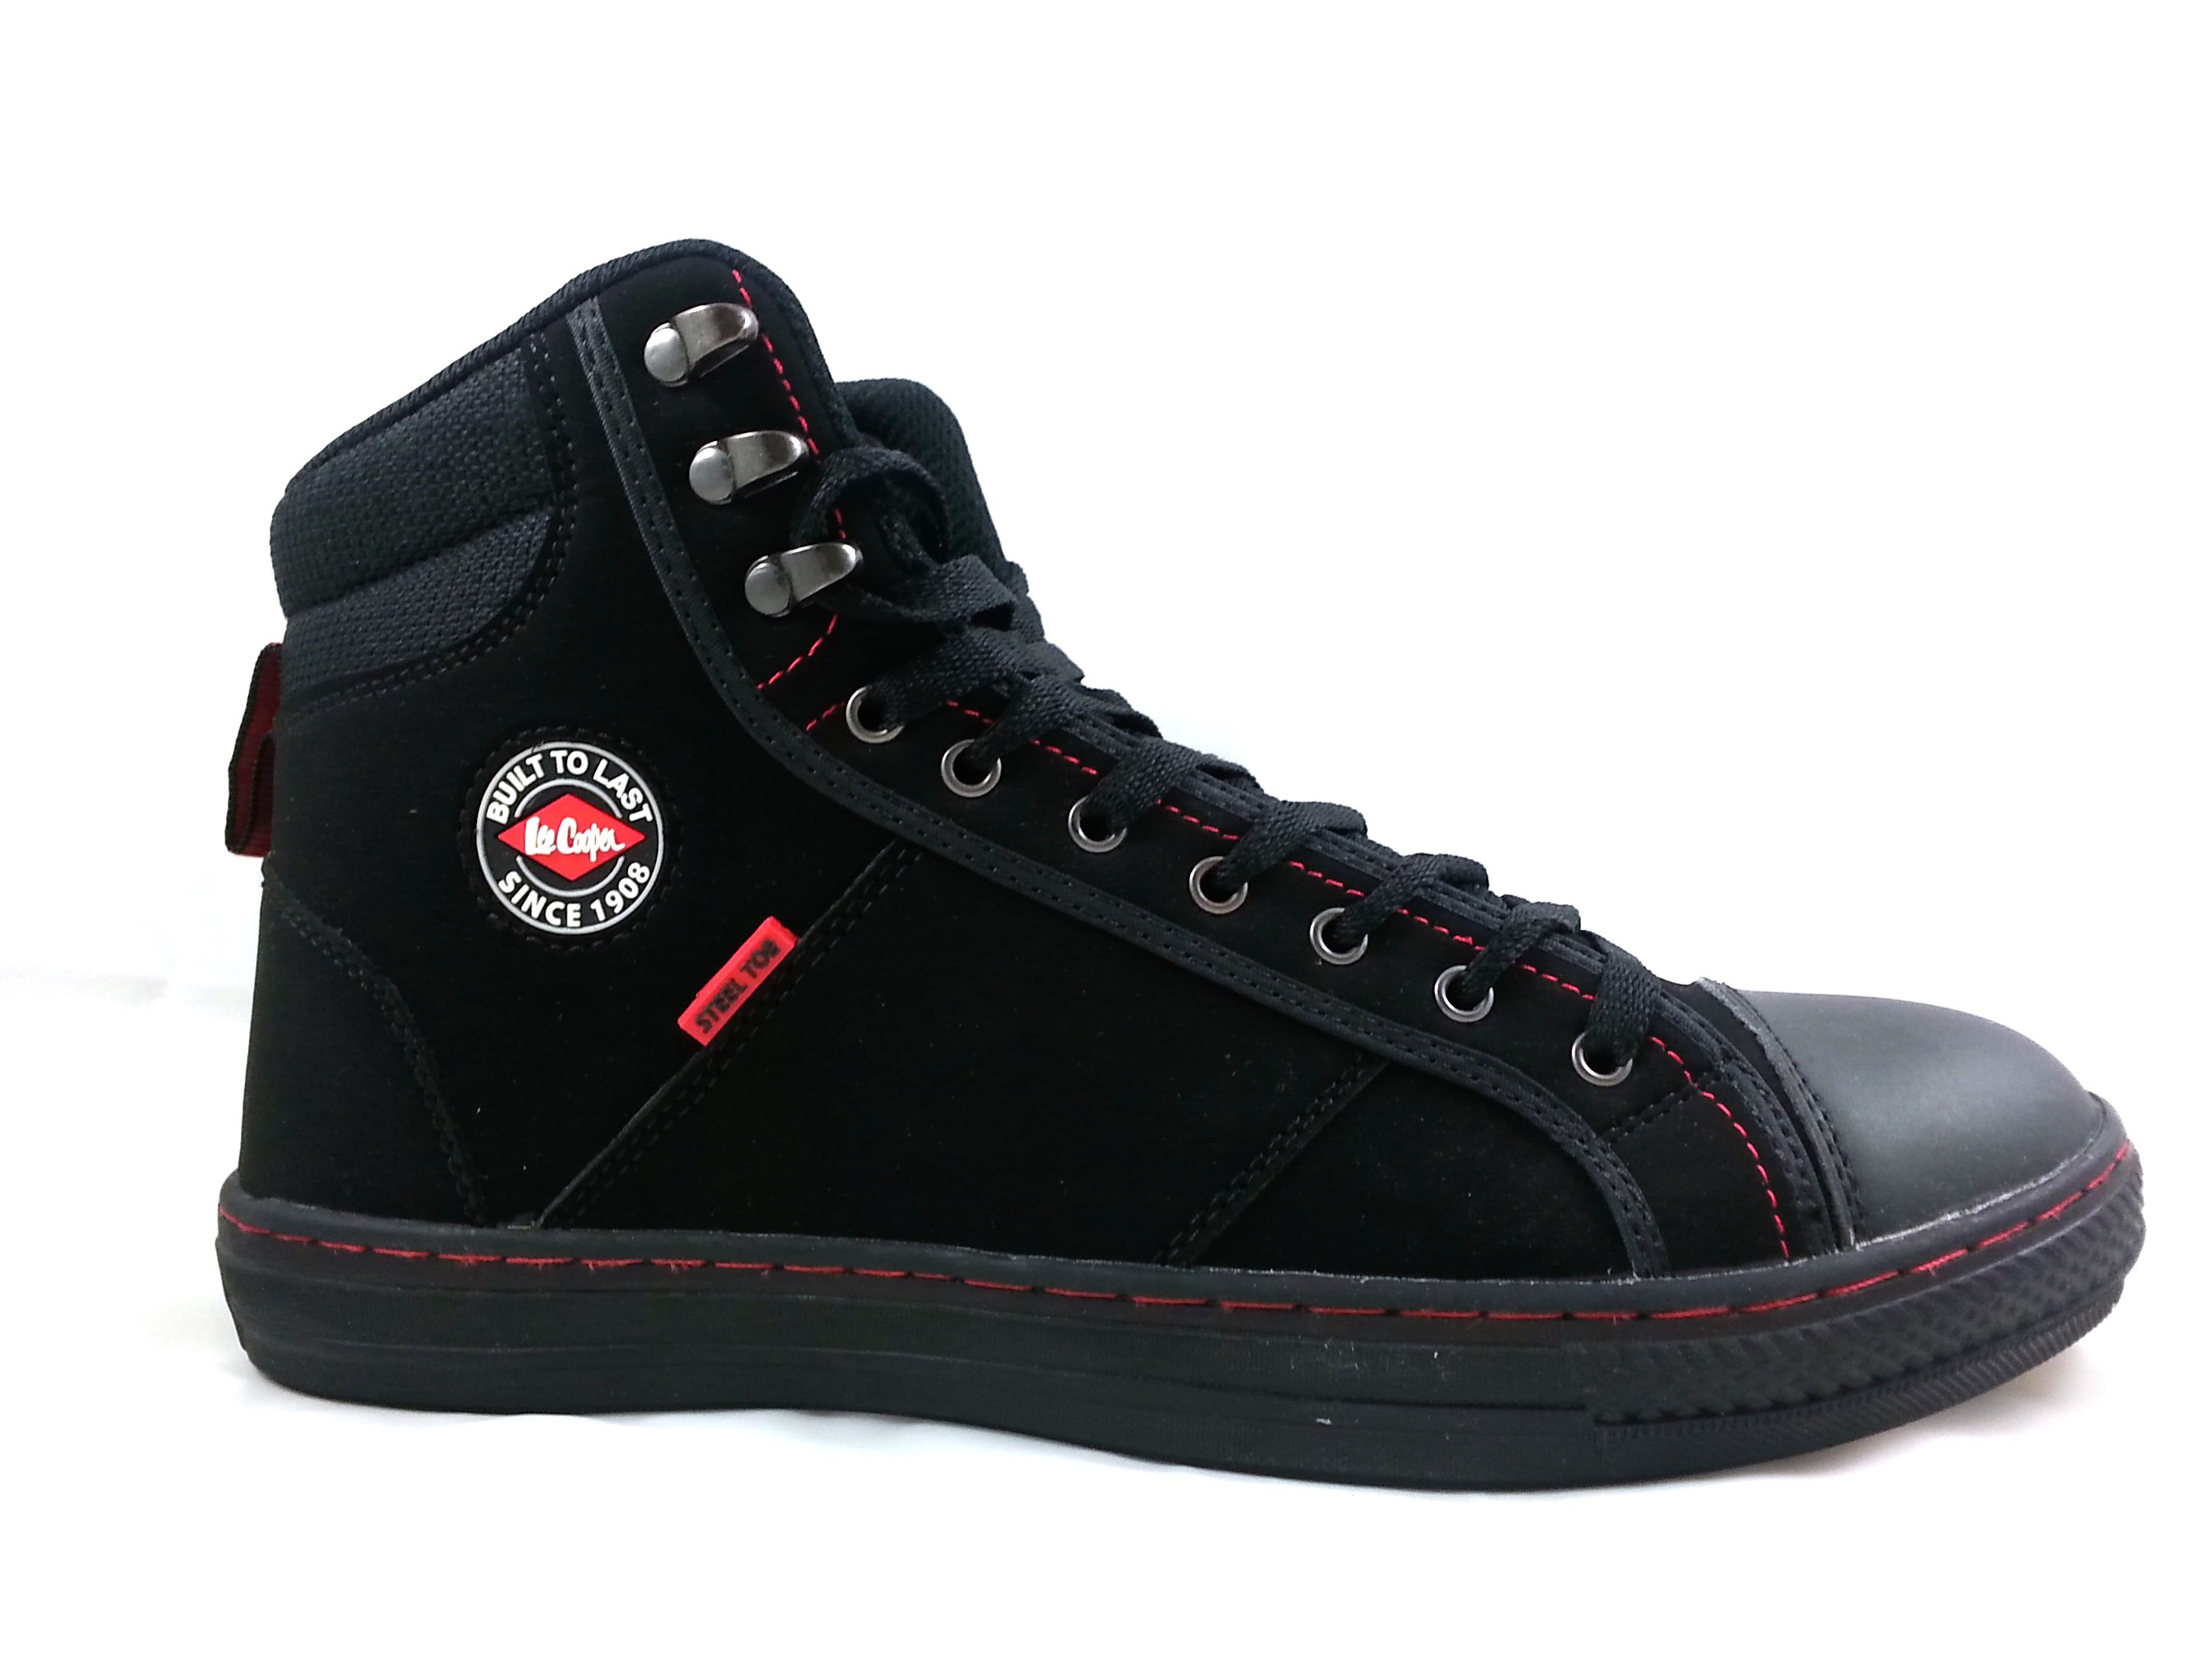 Chaussure travail style converse S1 SB Lee Cooper cotepro